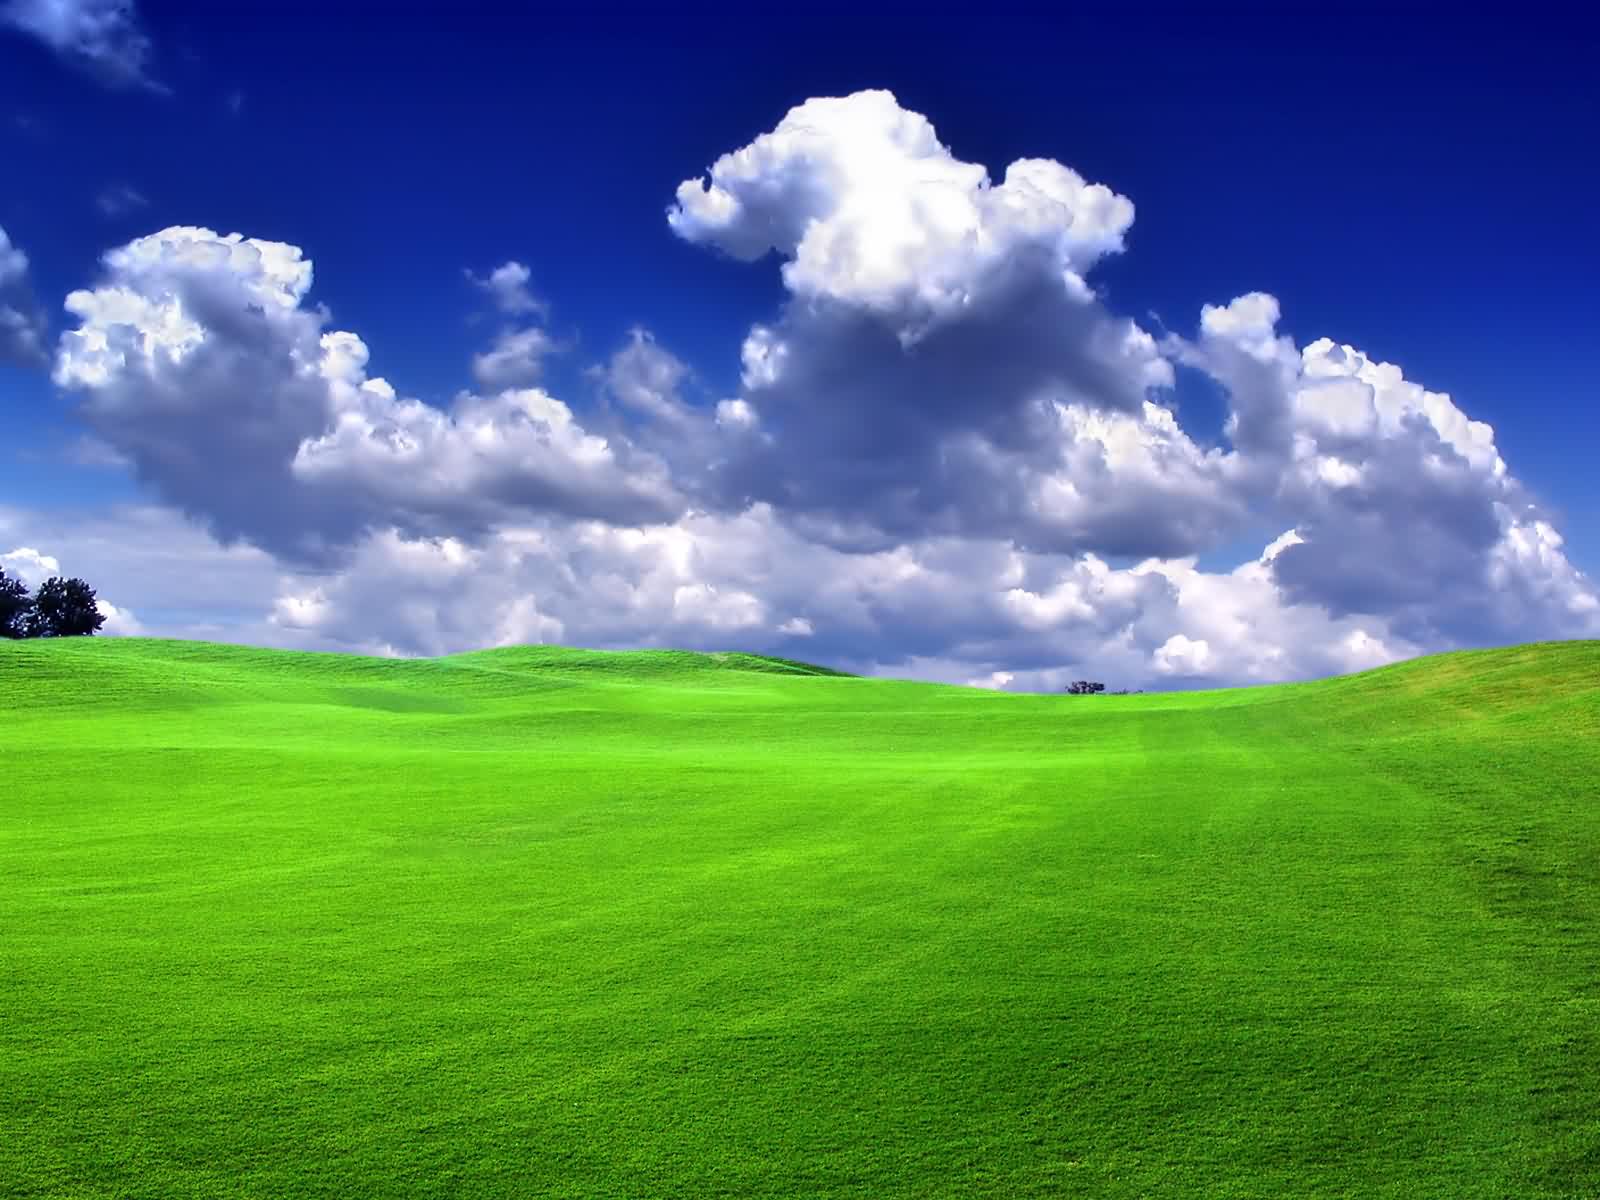 cloudy nature picture hd